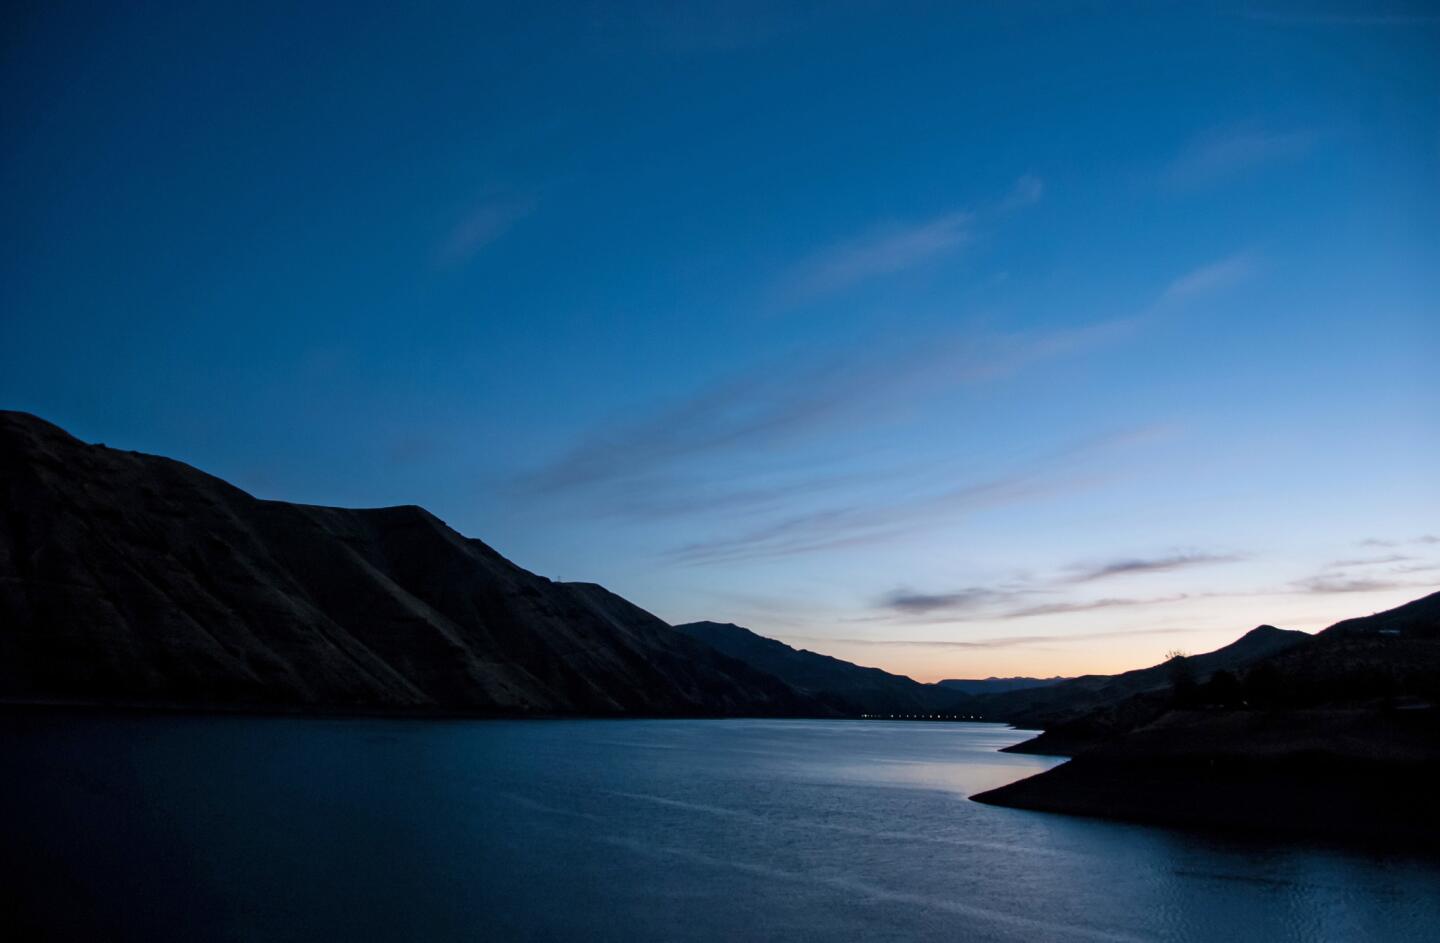 Early Dawn Breaking in the Heart of Hells Canyon ** OUTS - ELSENT, FPG, CM - OUTS * NM, PH, VA if sourced by CT, LA or MoD **